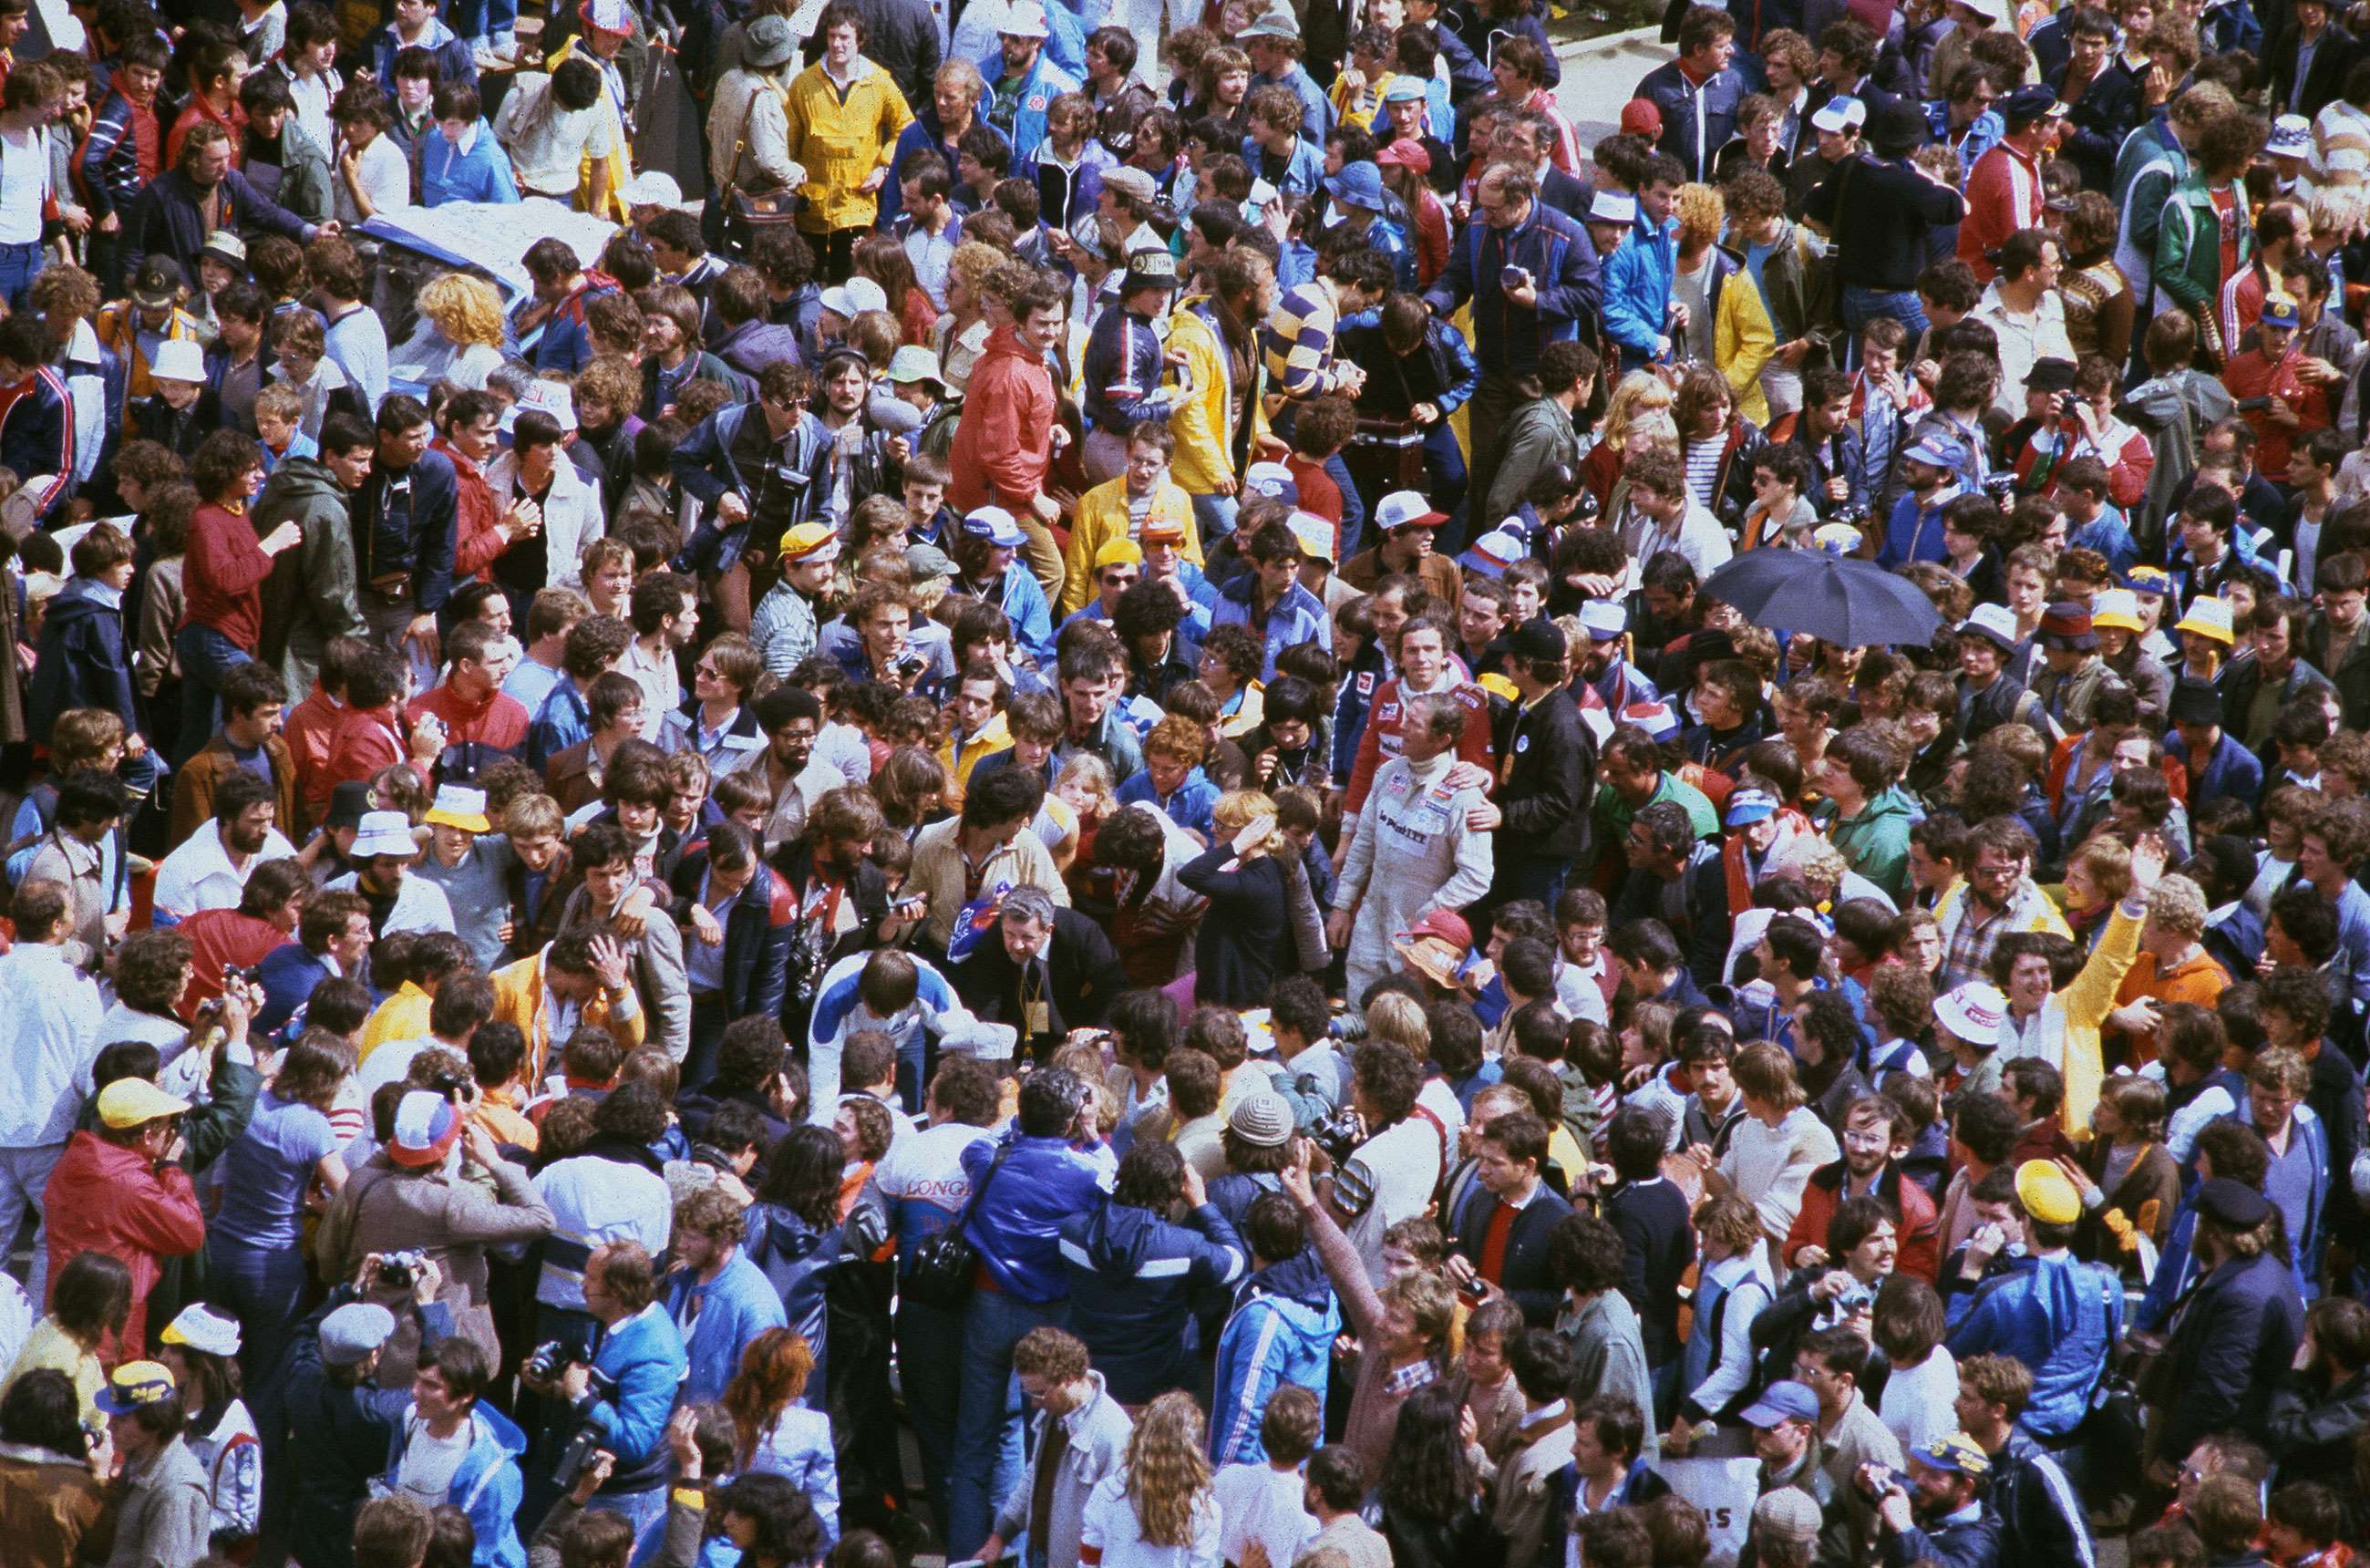 Post-race mob, Le Mans, 1980. Spot the winners Jean Rondeau and Jean-Pierre Jaussaud – they're in there somewhere...